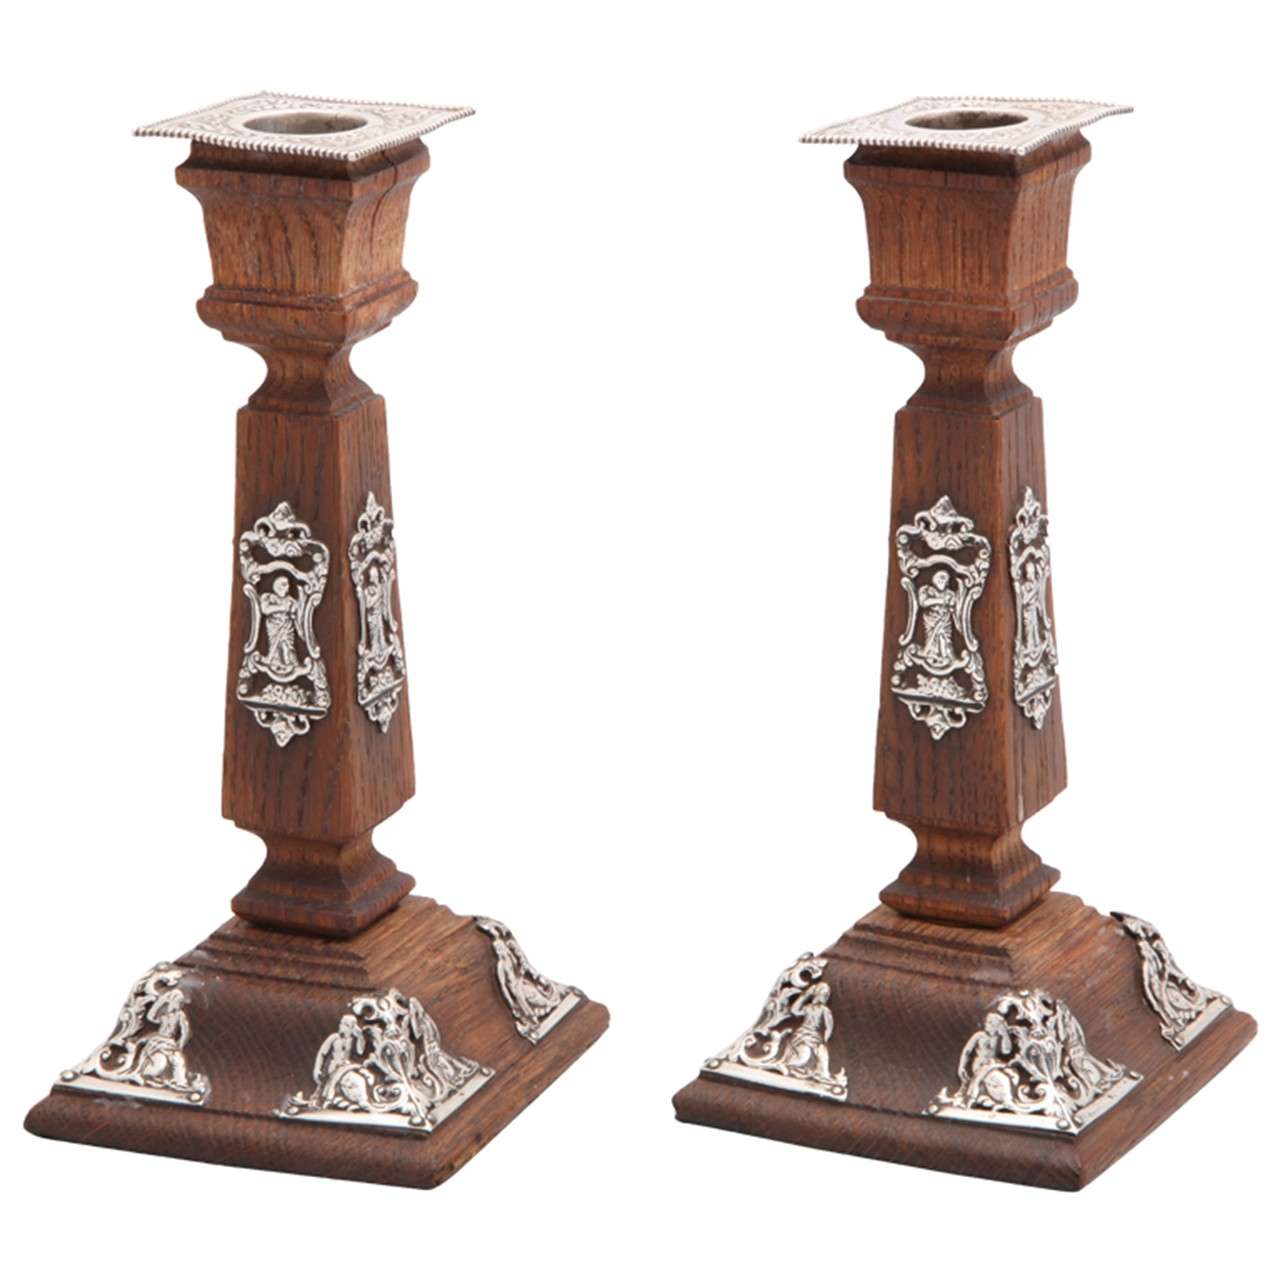 Pair of Victorian Sterling Silver-Mounted Oak Candlesticks